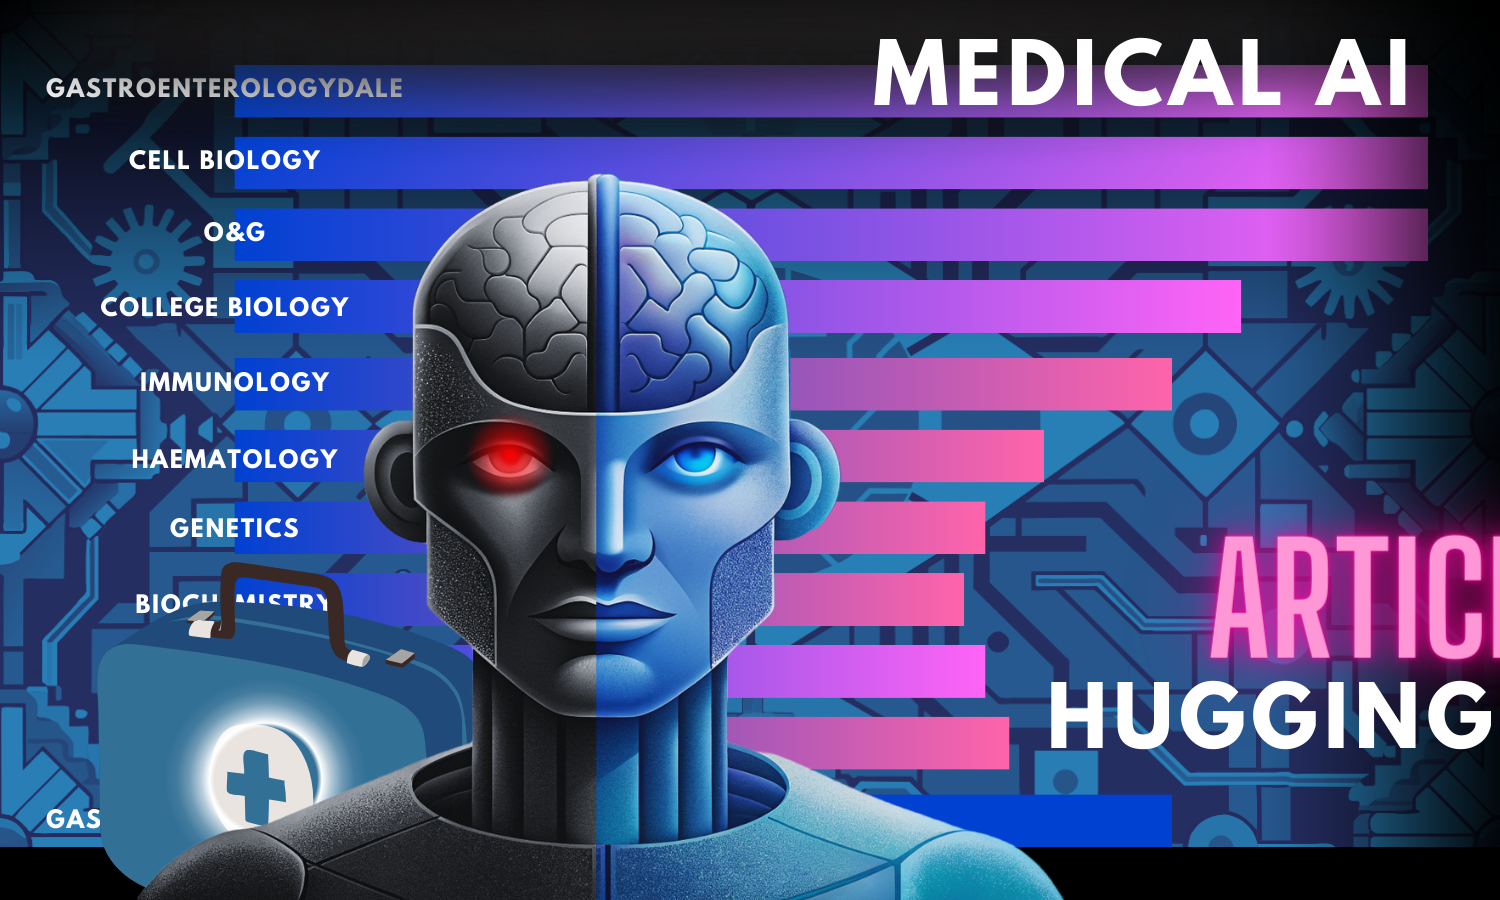 "MEDICAL AI" and an illustration of two arms embracing.